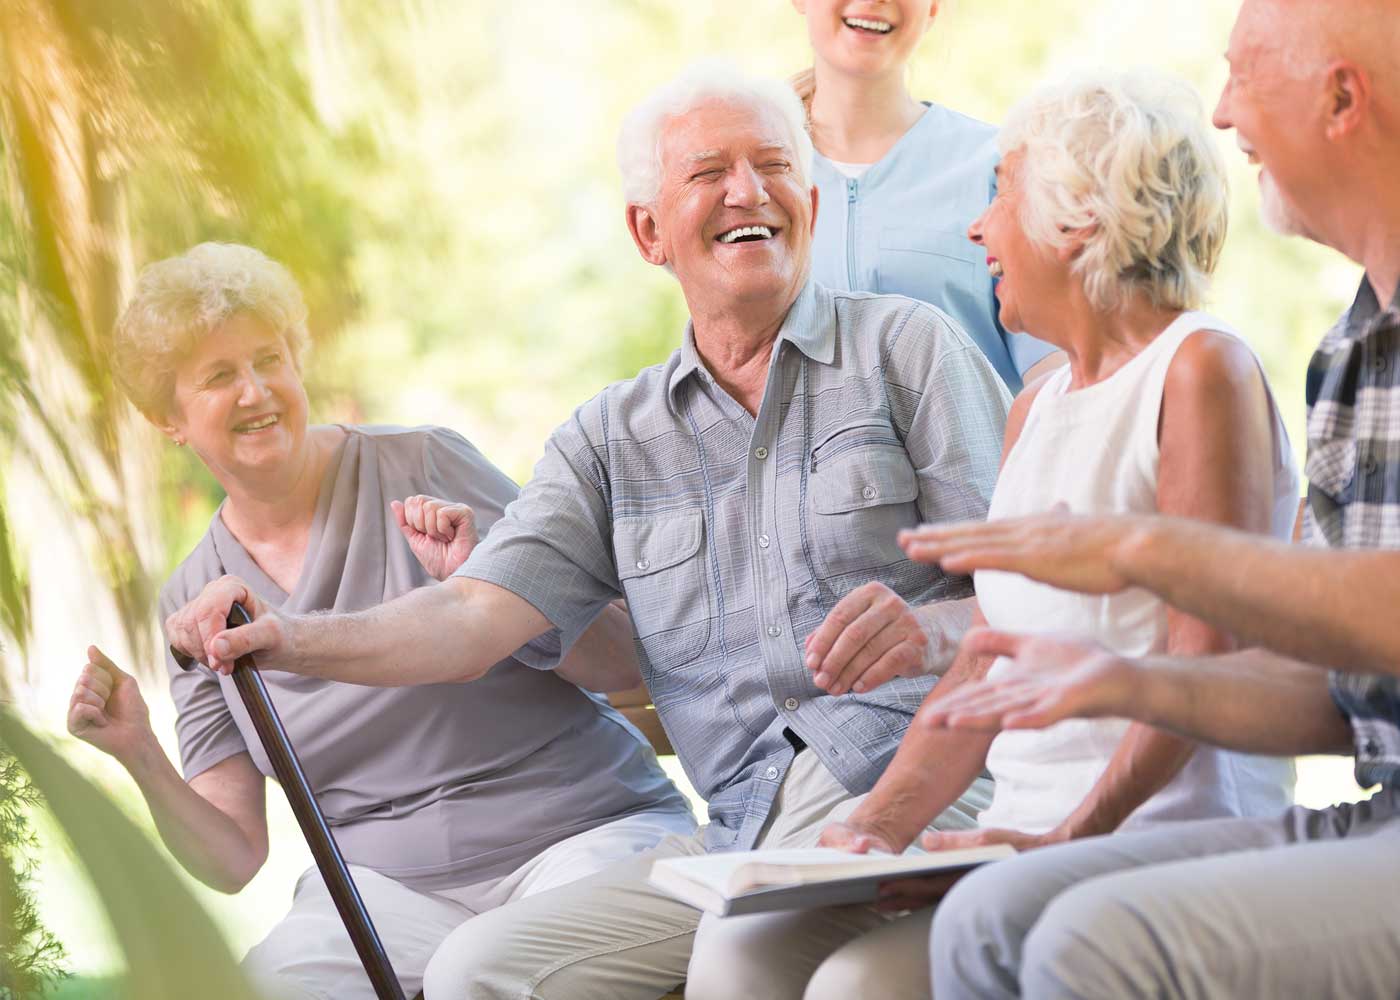 Group of older adults sitting outside, smiling together